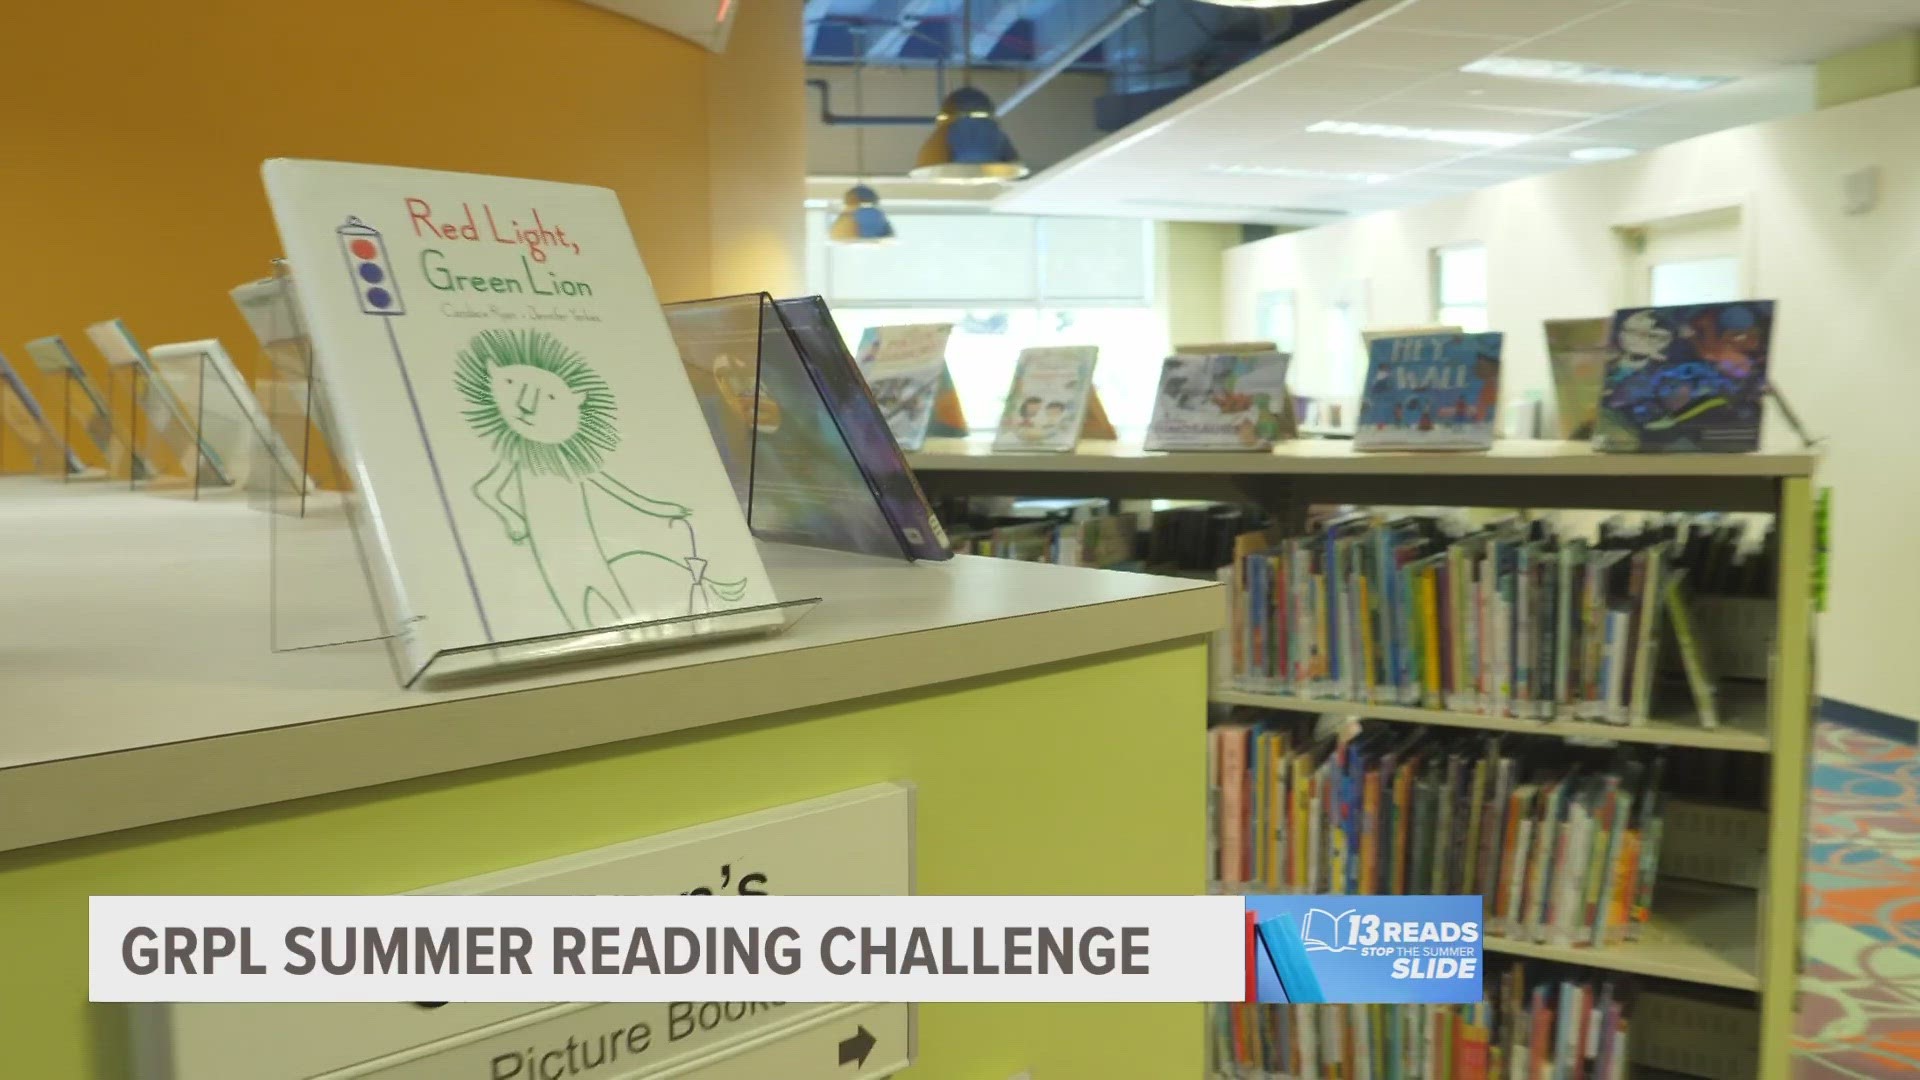 Participants can earn prizes for meeting their summer reading goals. A GRPL card is not required, and readers of all ages are encouraged to participate.